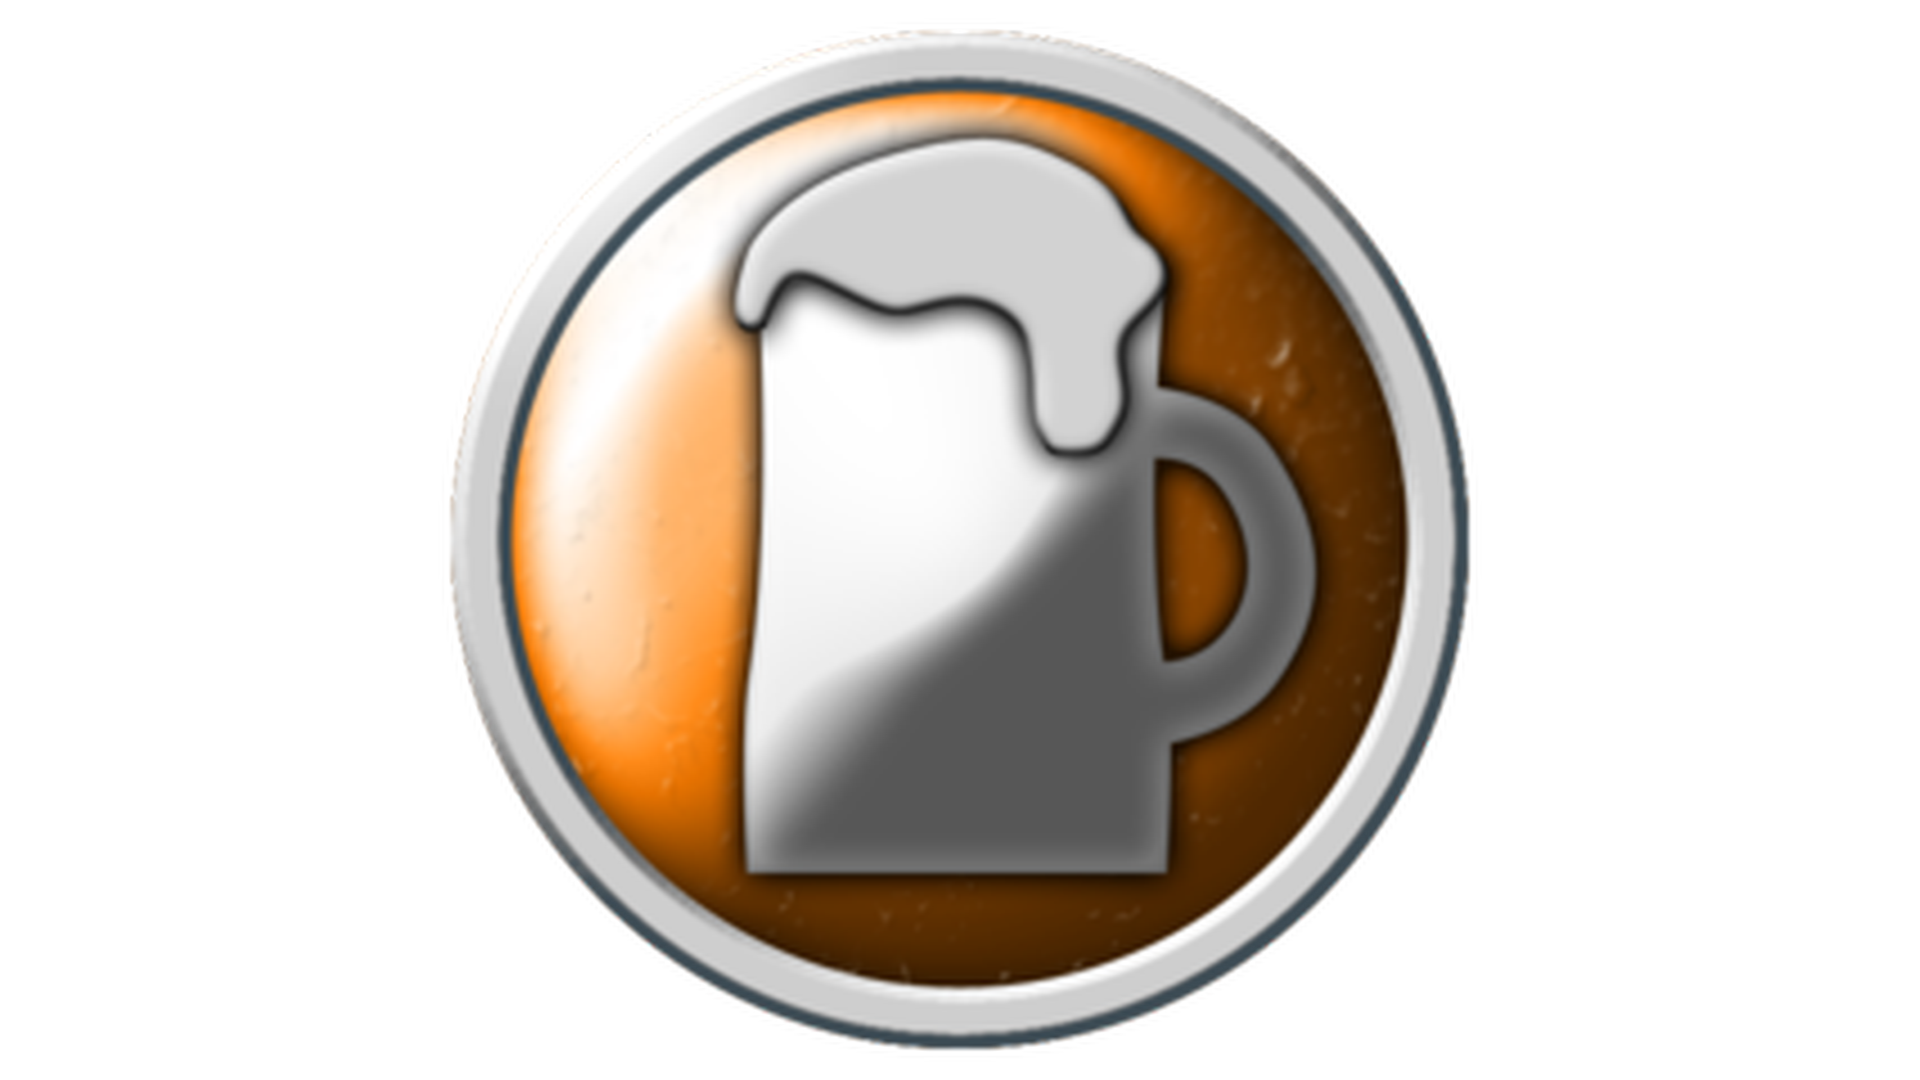 Icon for Brew Connoisseur